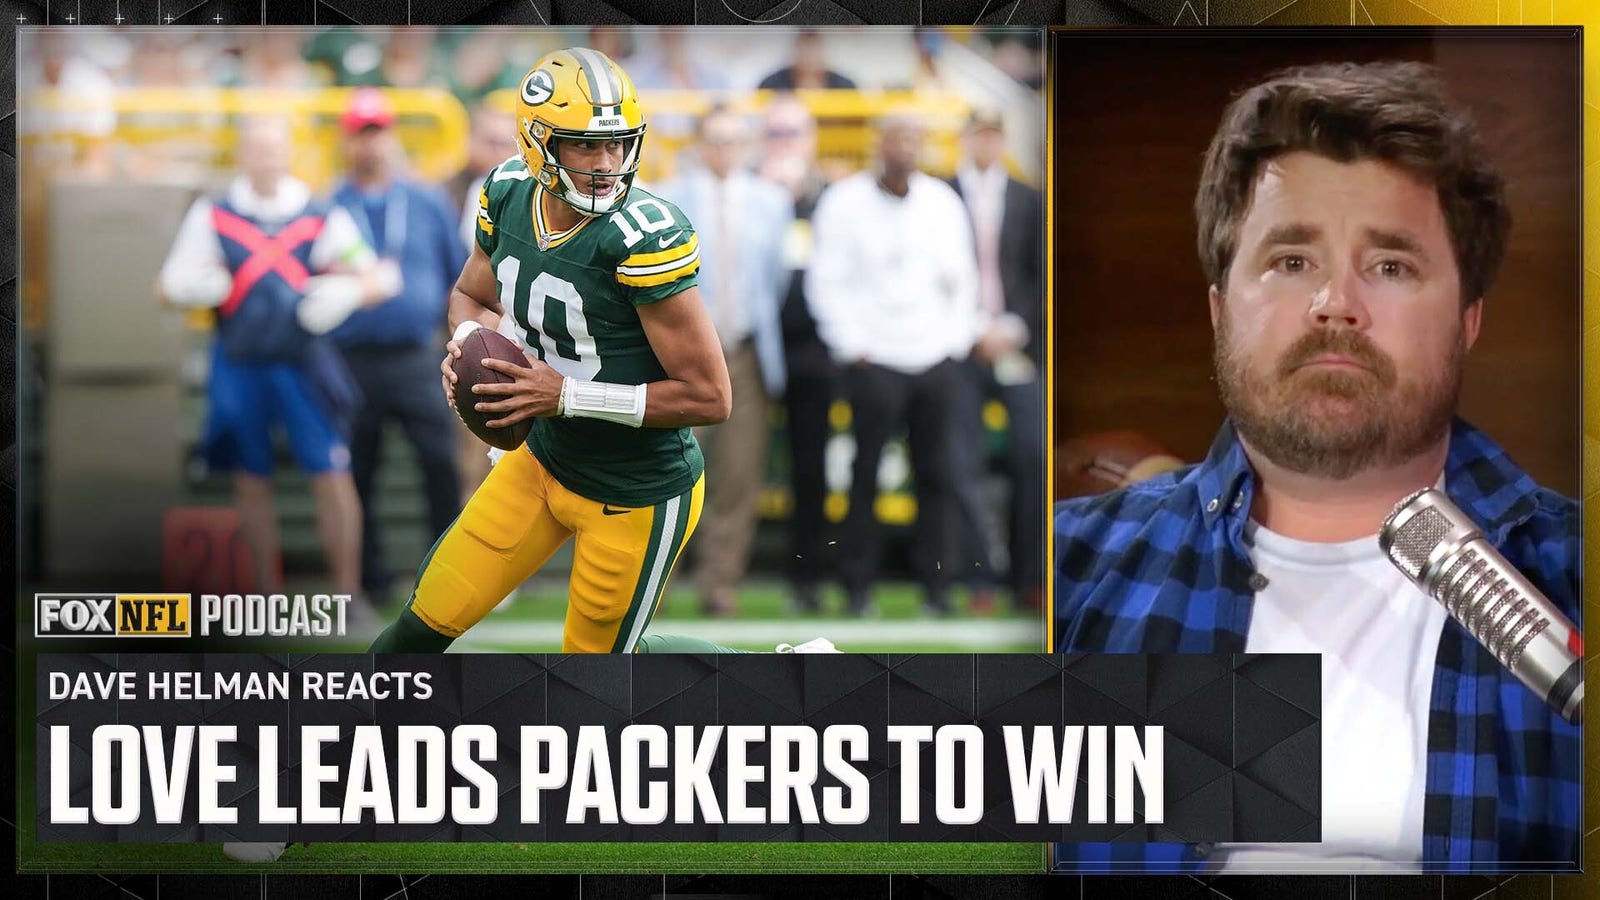 Dave Helman reacts to Packers' comeback win